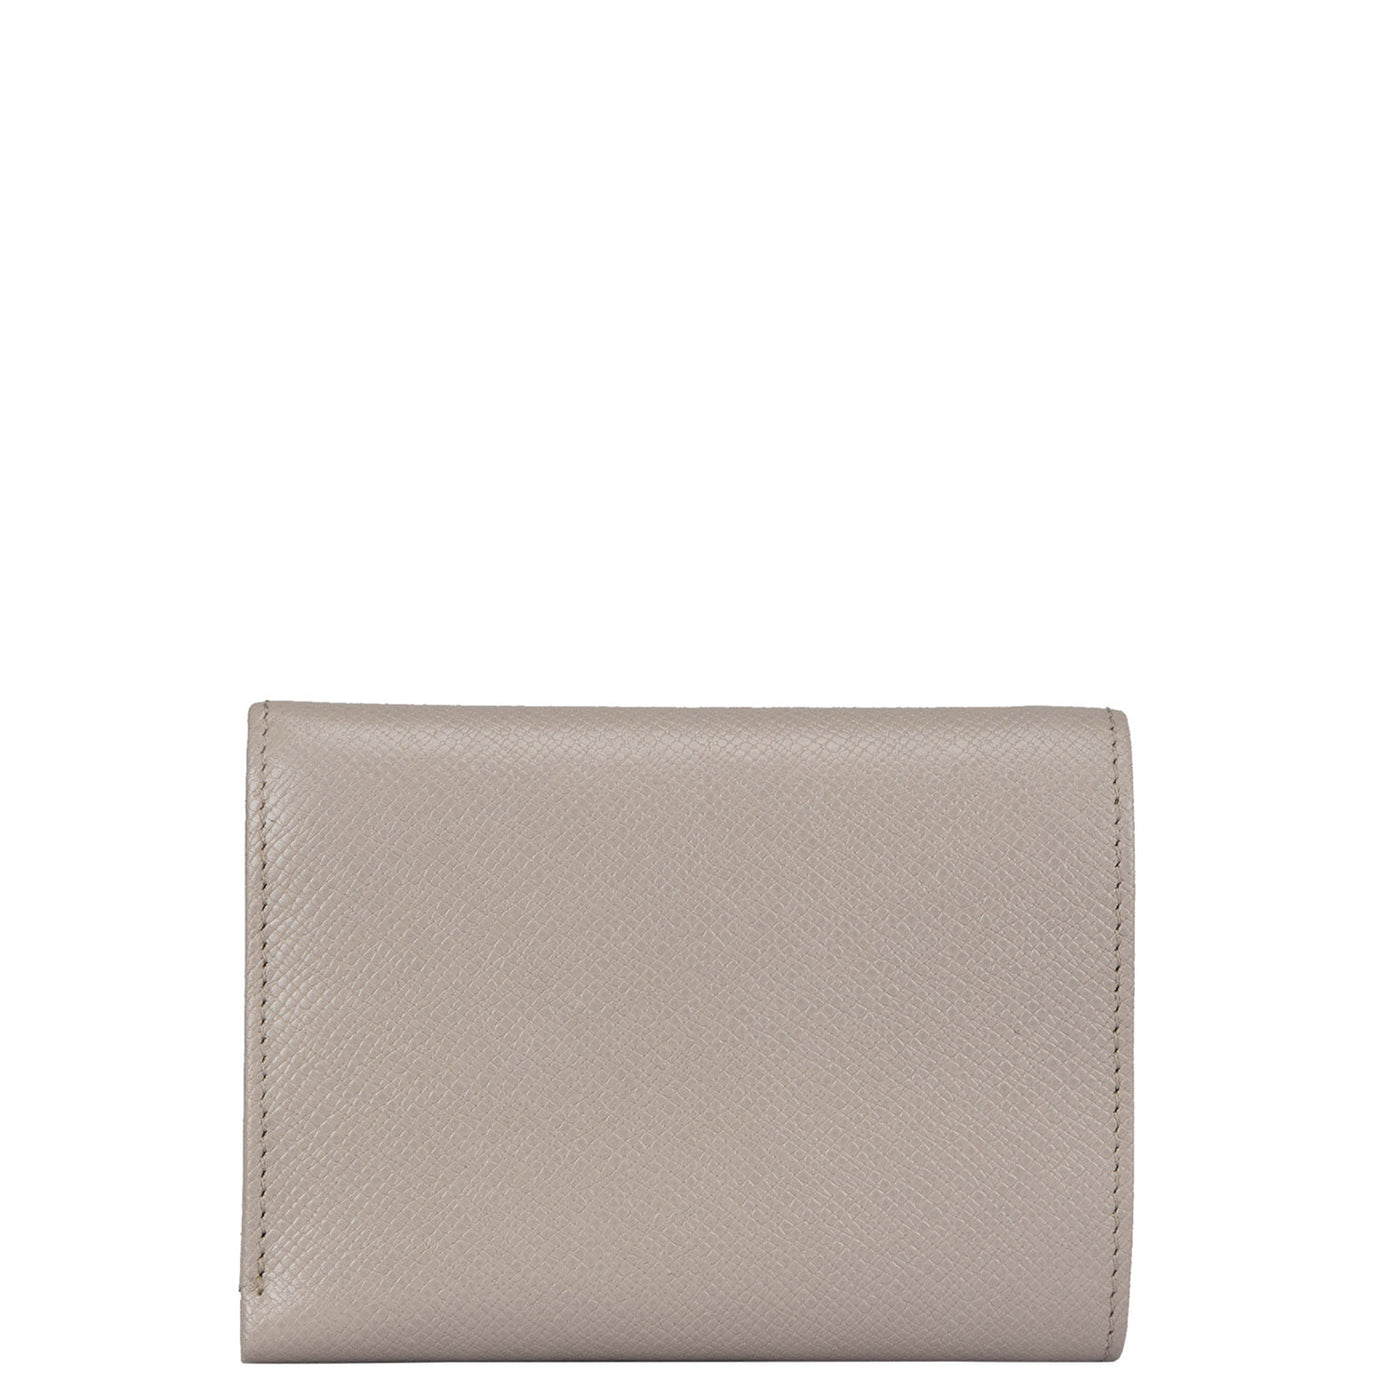 Franzy Leather Ladies Wallet - Ivory